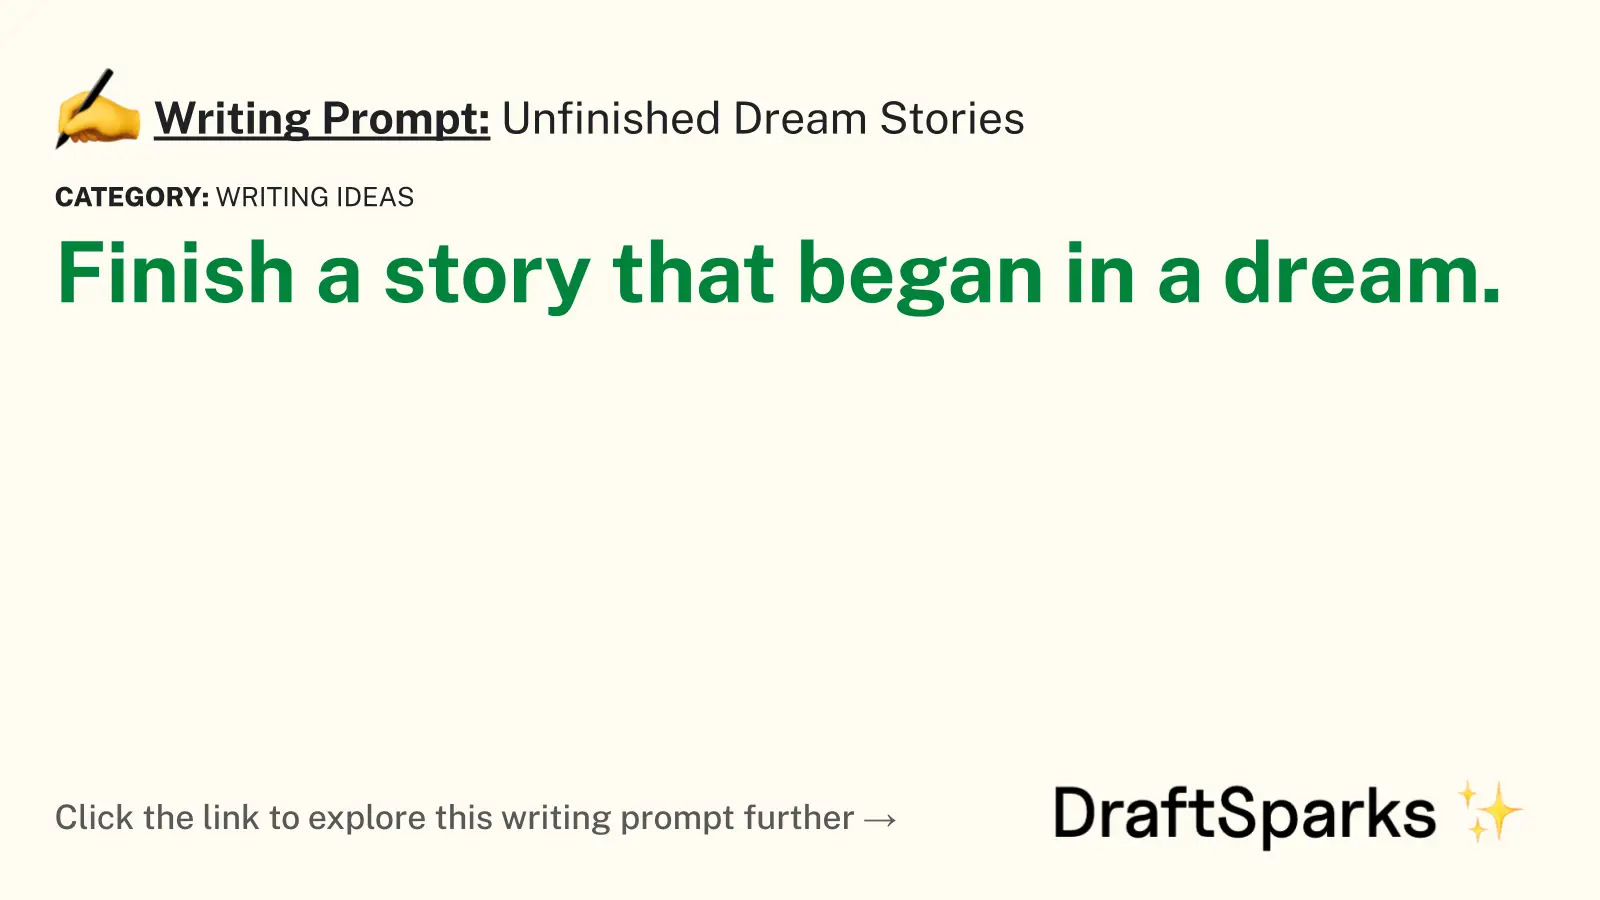 Unfinished Dream Stories